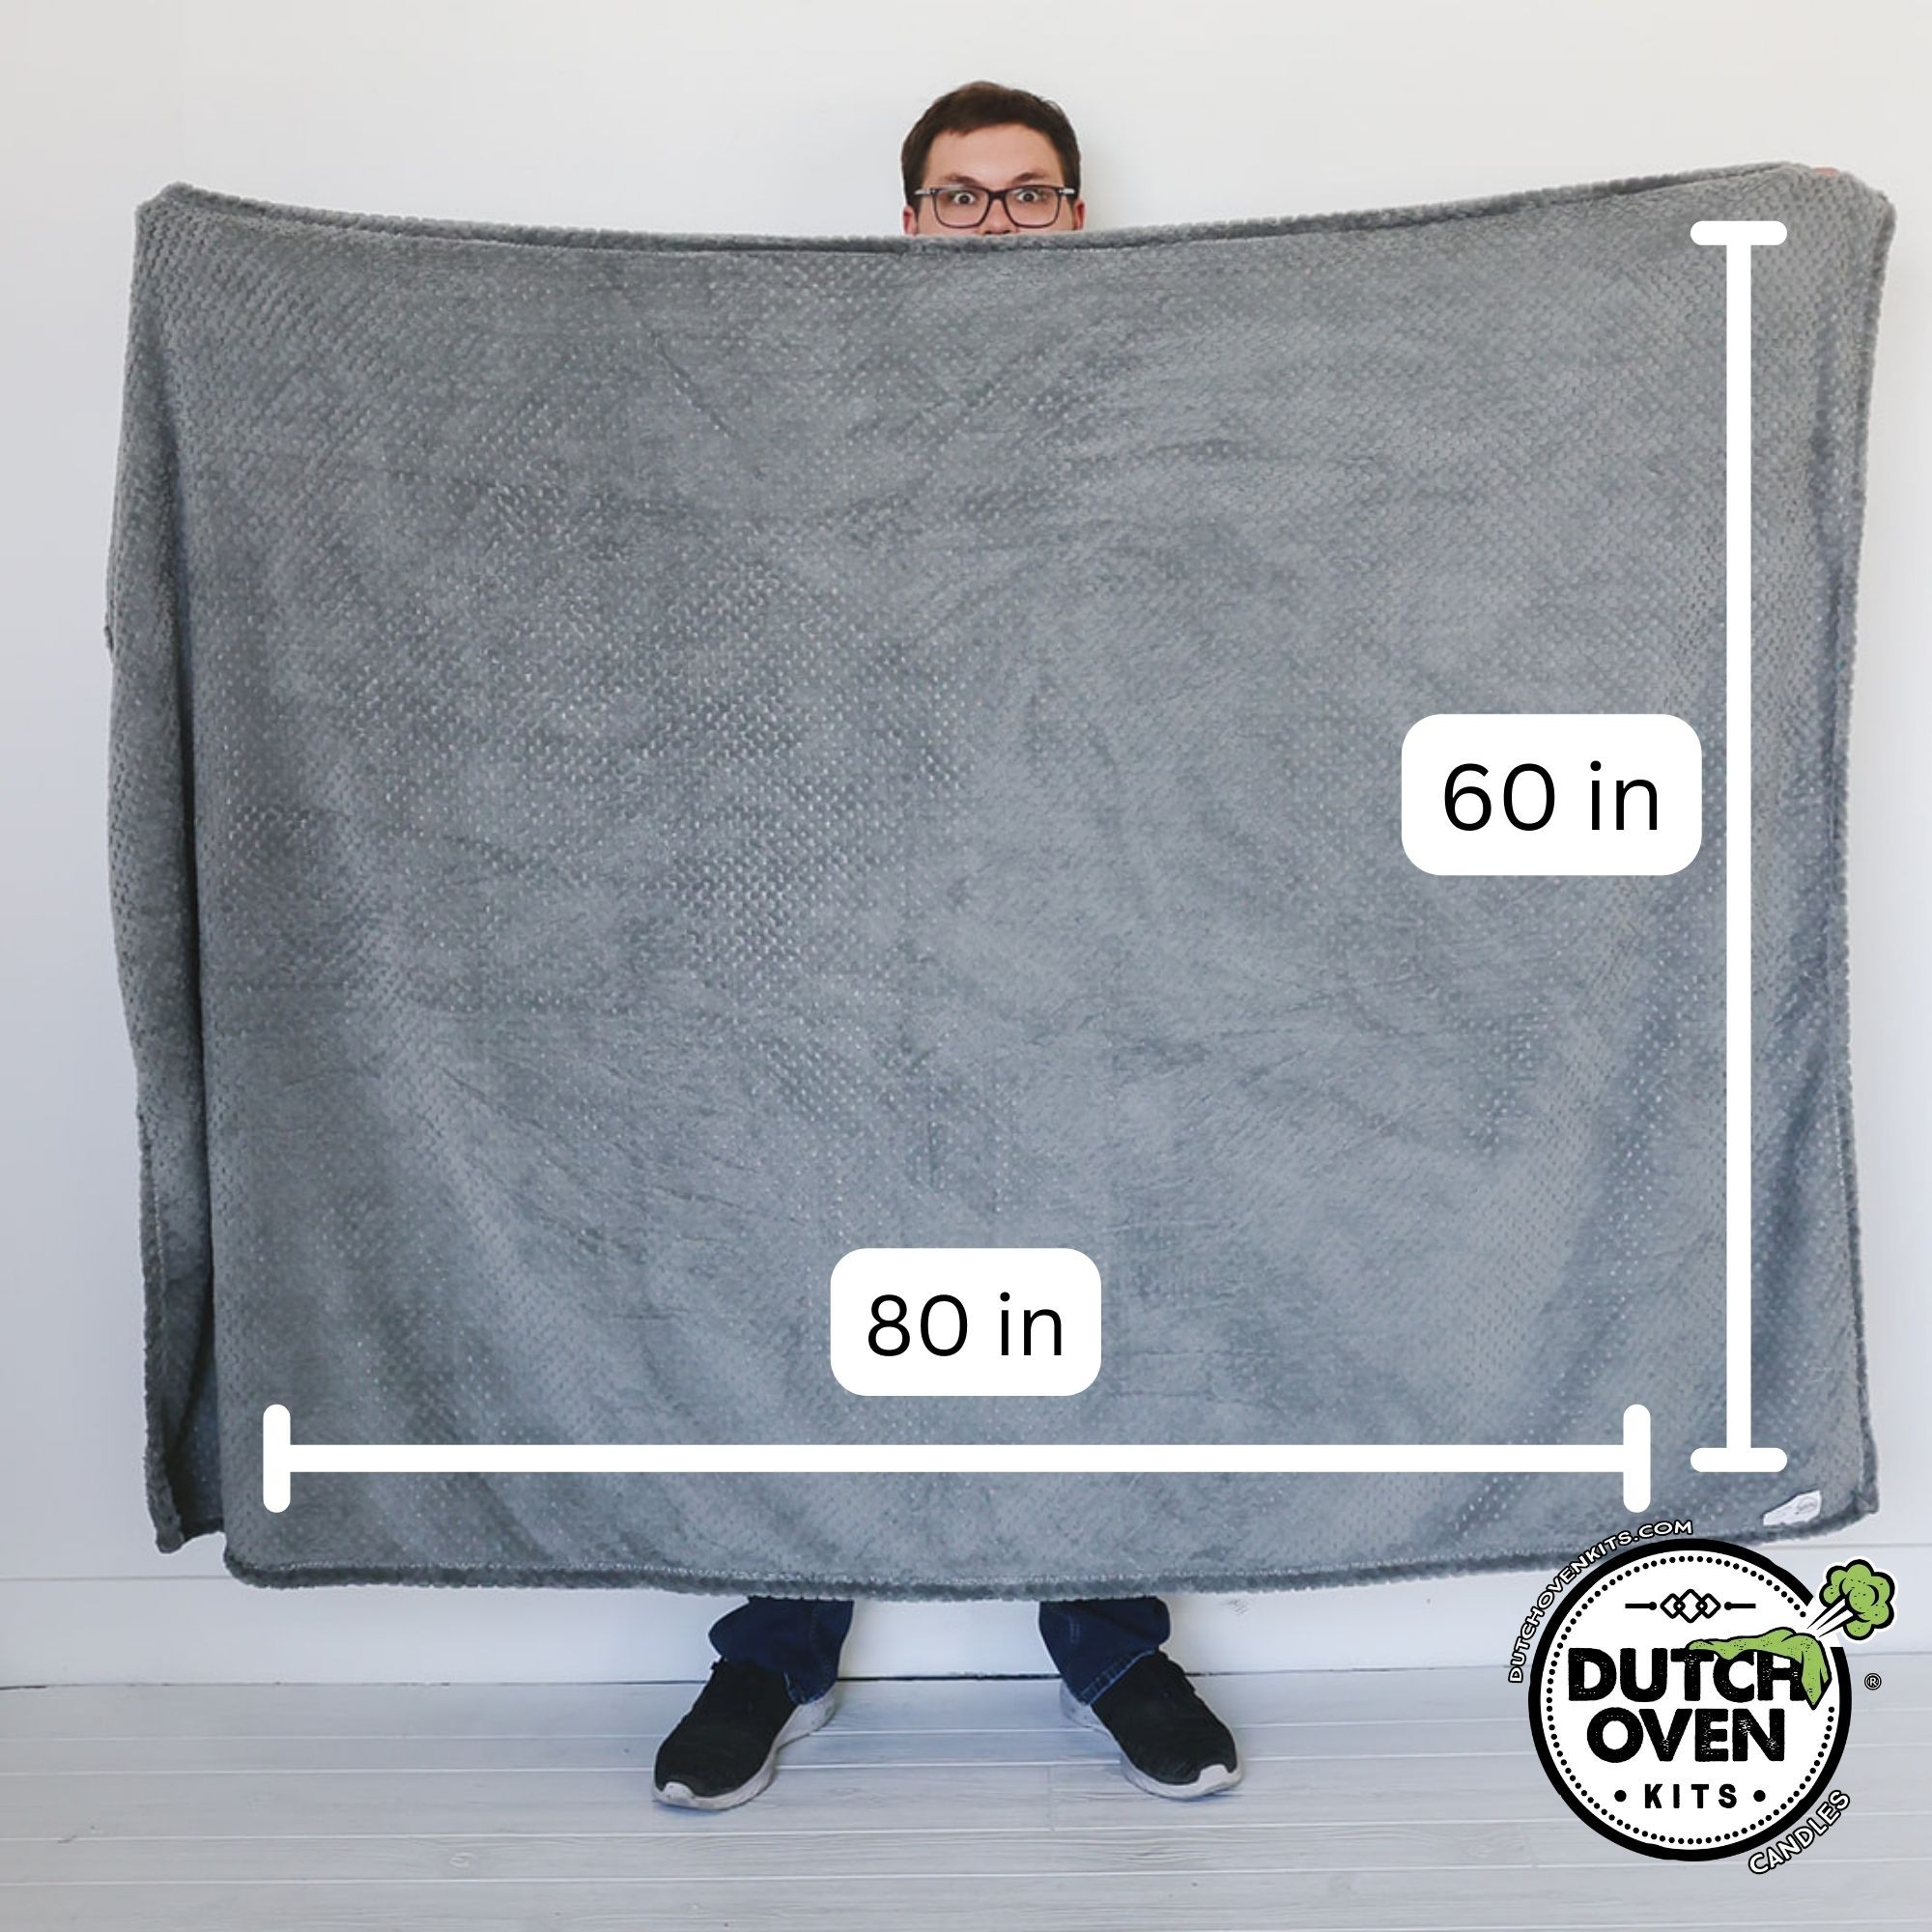 A man holding up a gray dutch oven kits fart blanket displaying it's size. 60in x 80in